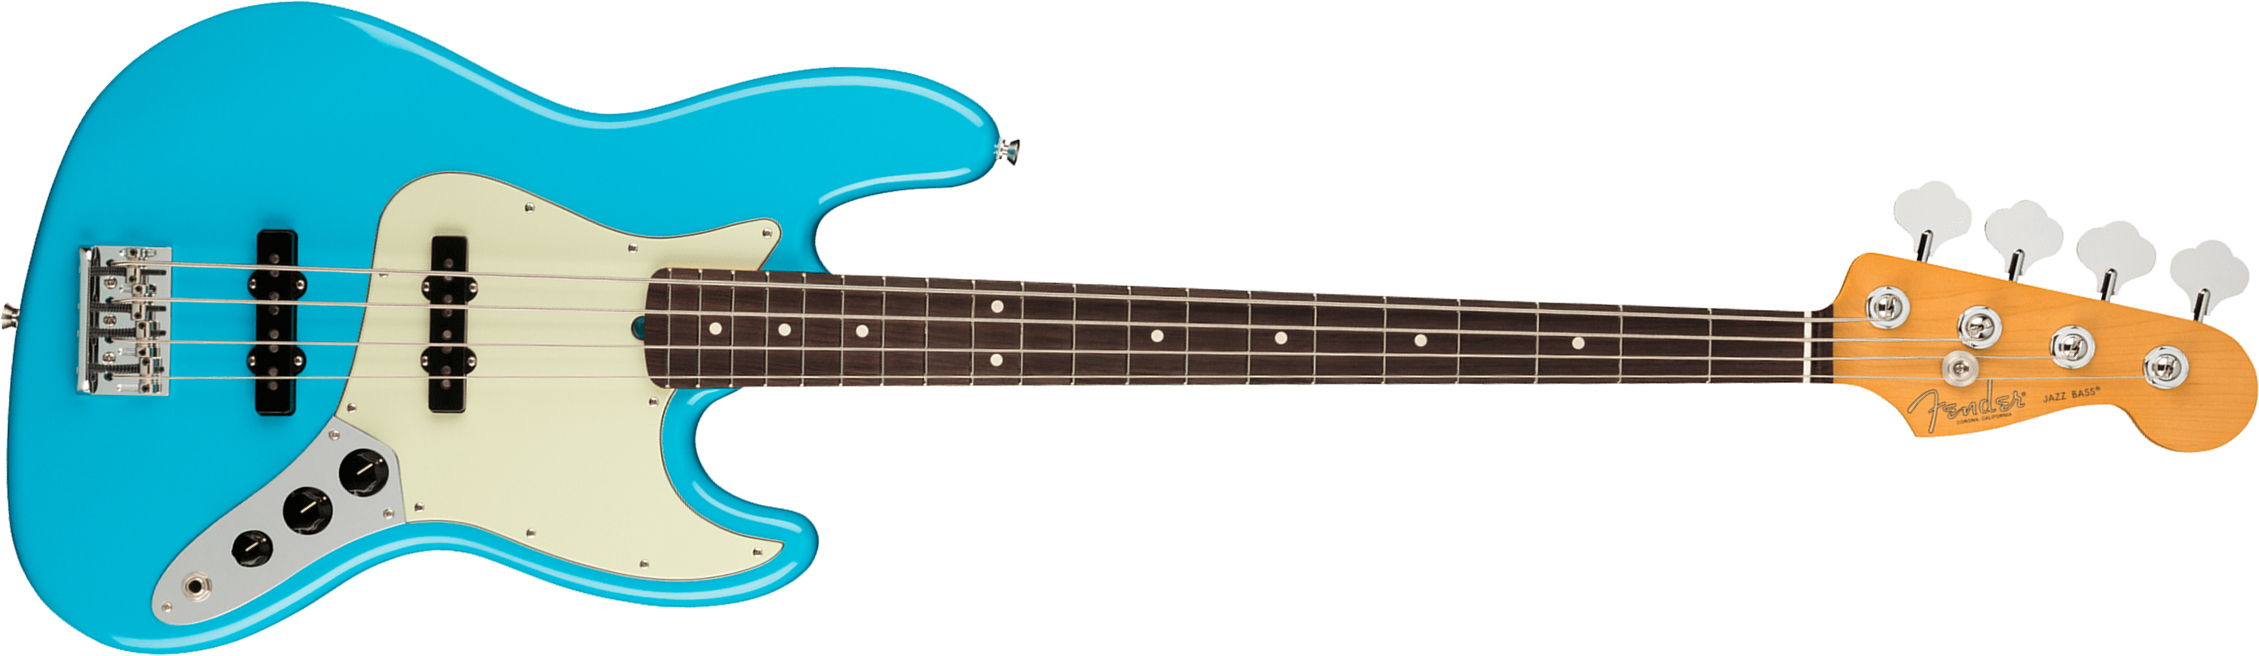 Fender Jazz Bass American Professional Ii Usa Rw - Miami Blue - Basse Électrique Solid Body - Main picture